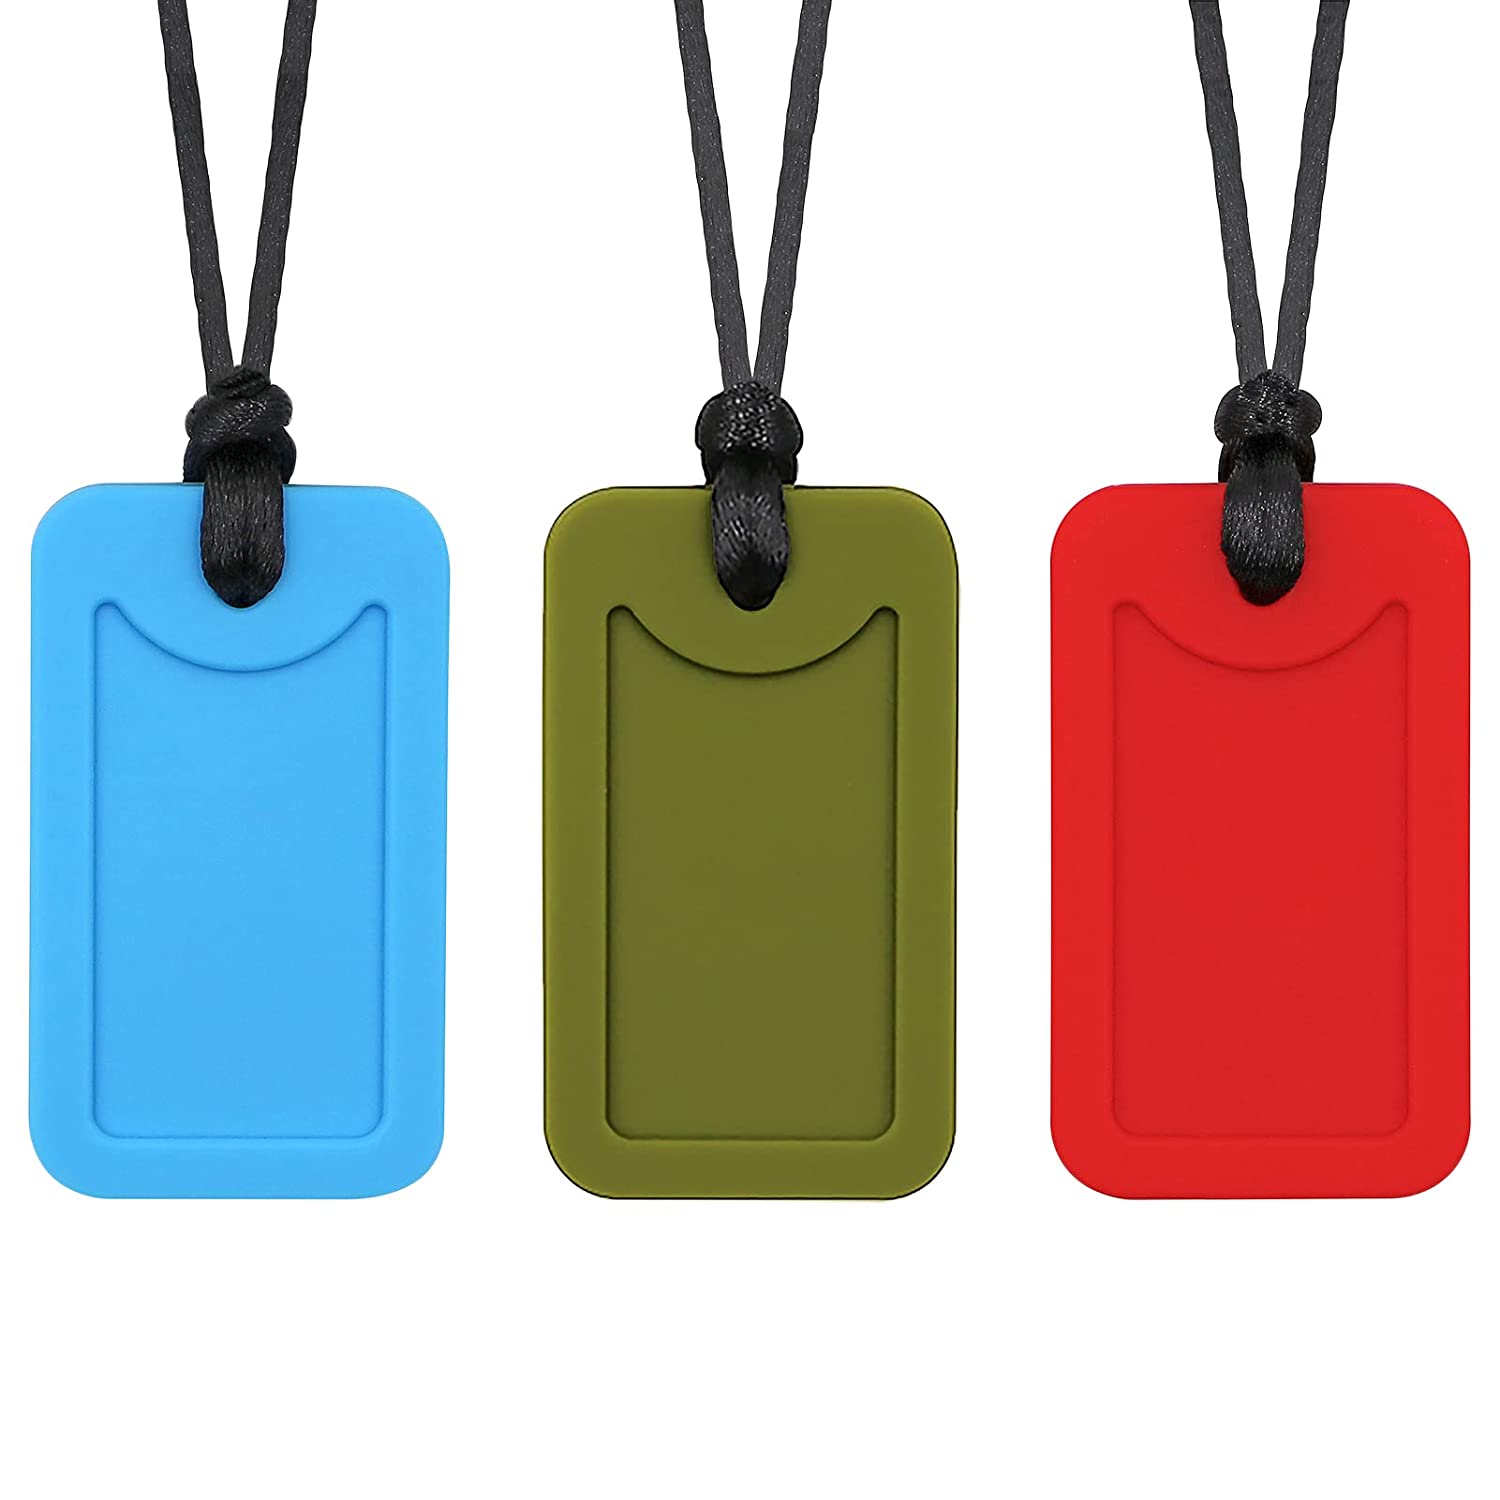 Chew Necklaces for Sensory Kids, Chewable Necklace for Autistic, ADHD